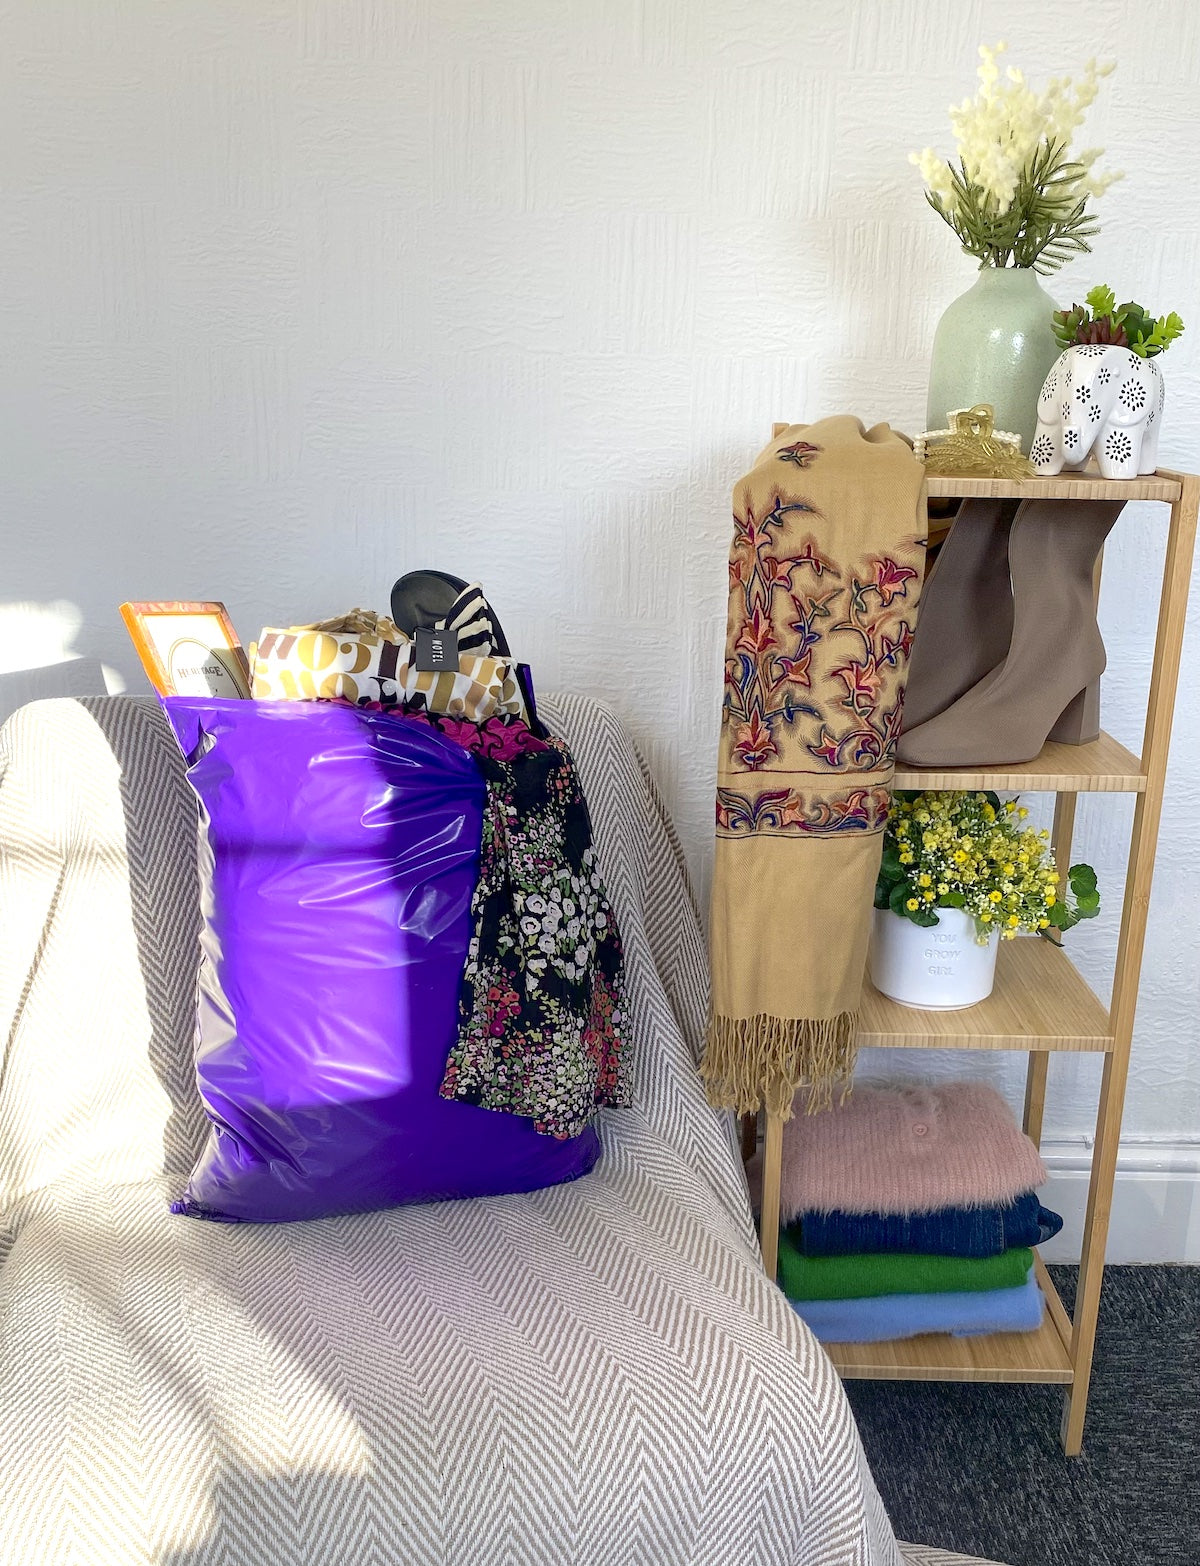 purple mailer bag filled with womens clothes which is sitting on a chair, next to wooden shelves which have clothes, bags, shoes and ornaments on it